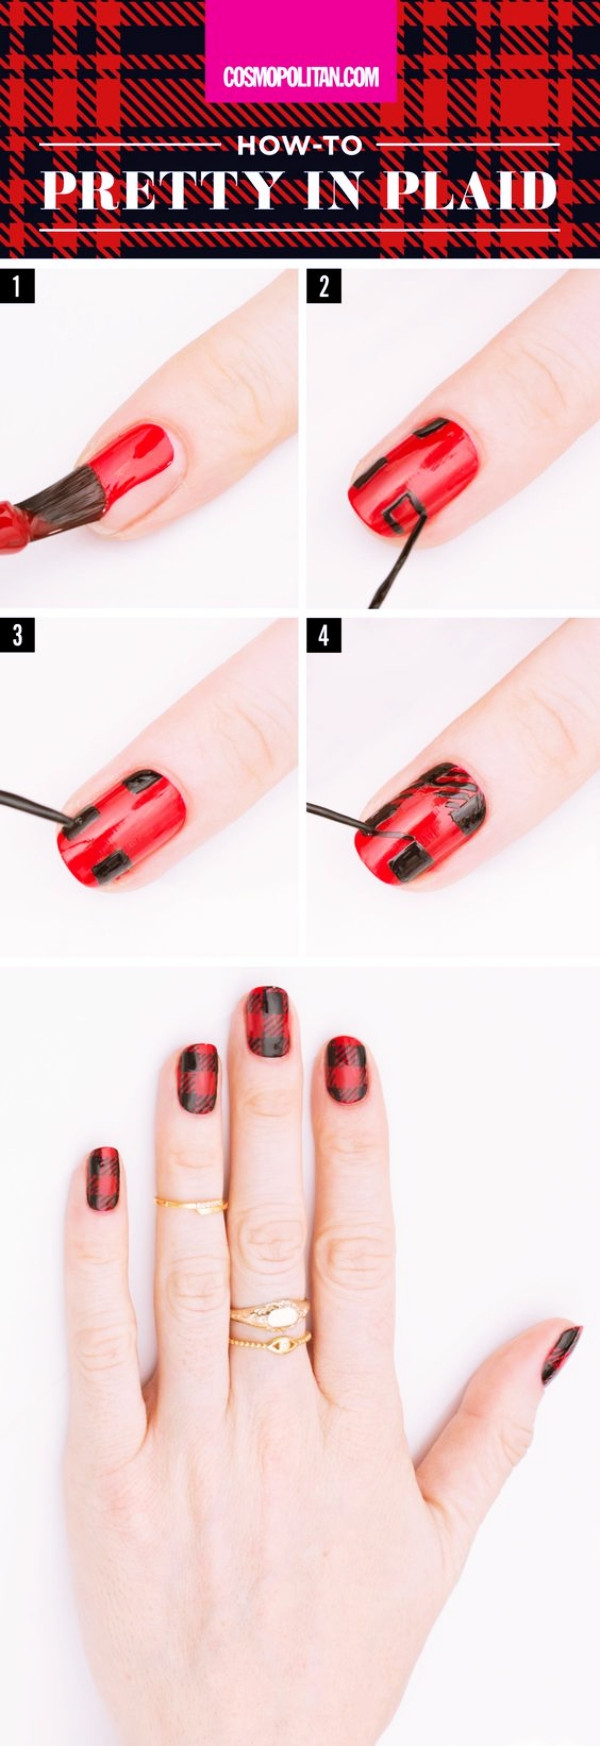 Diy Christmas Nail Art
 35 DIY Christmas Nail Art Designs Tutorials to Make in No Time